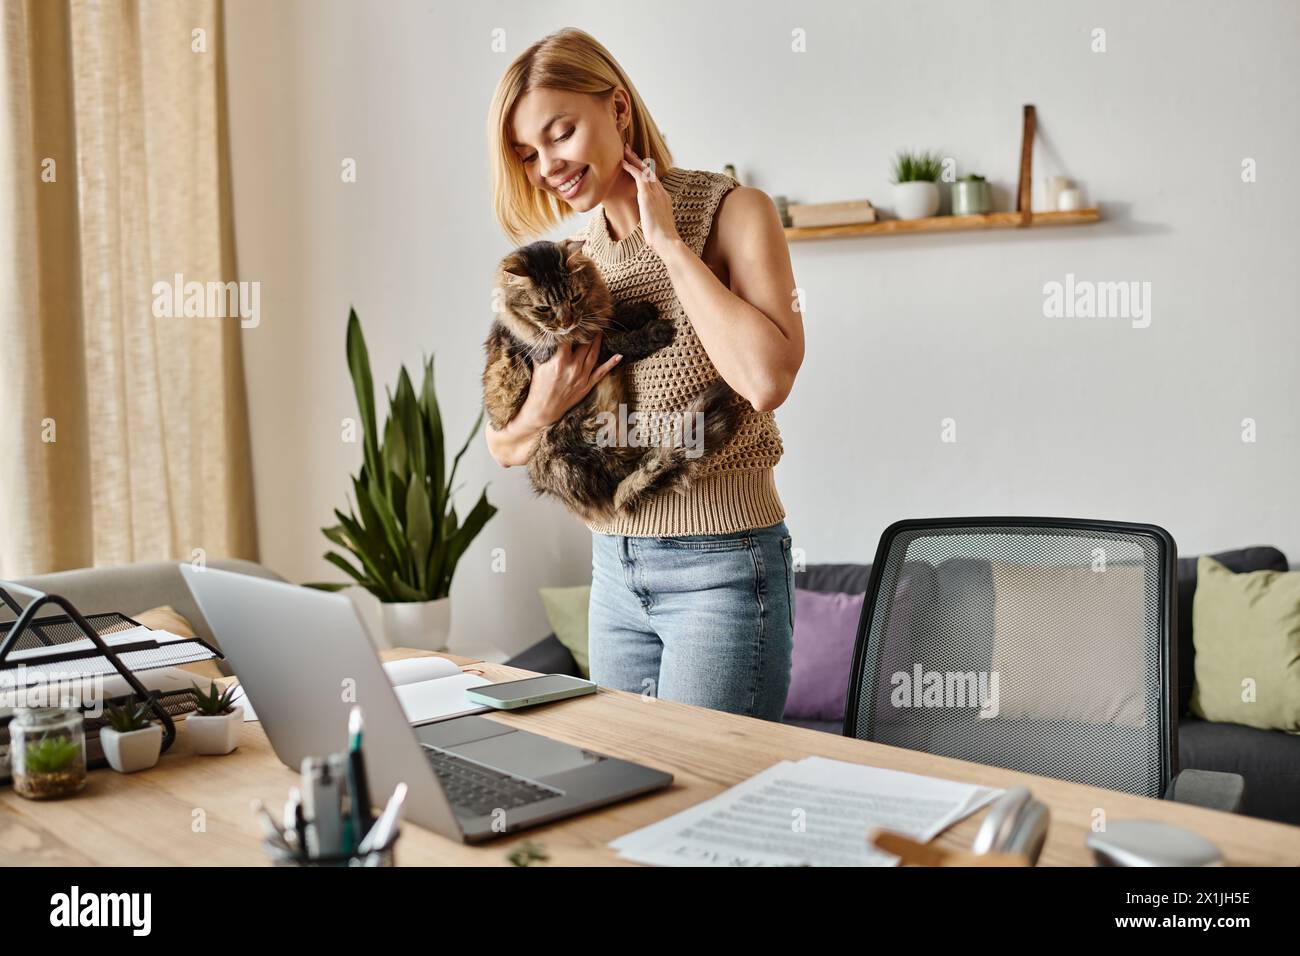 A woman holds her cat lovingly while standing by a laptop at home. Stock Photo